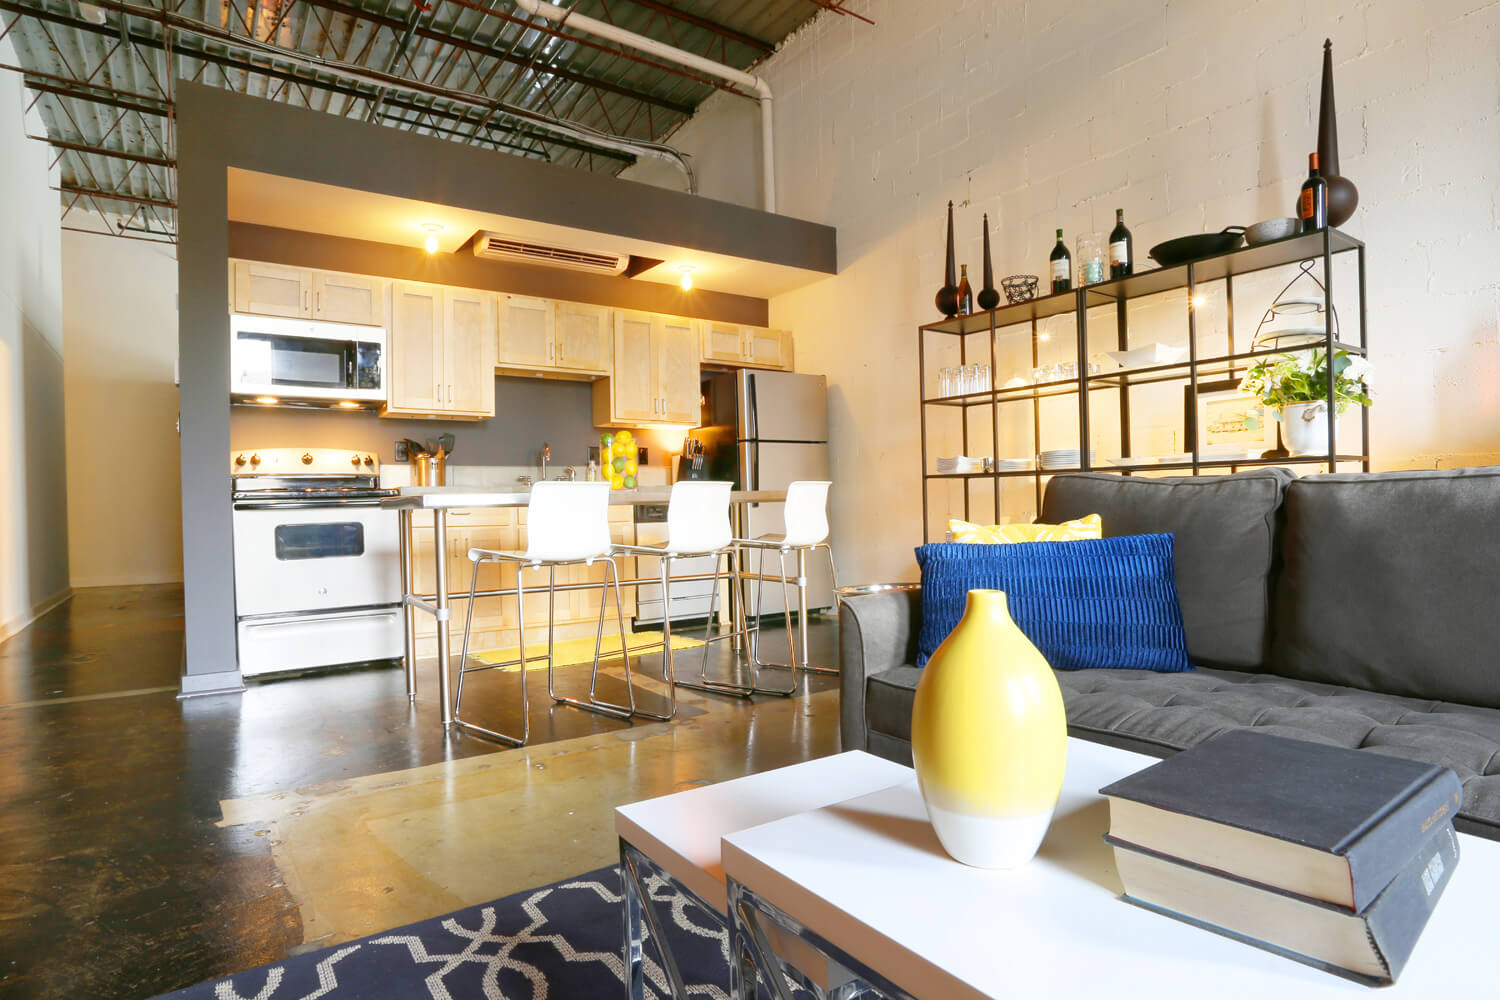 District 36 Lofts Designed by Foshee Architecture - Apartment Kitchen